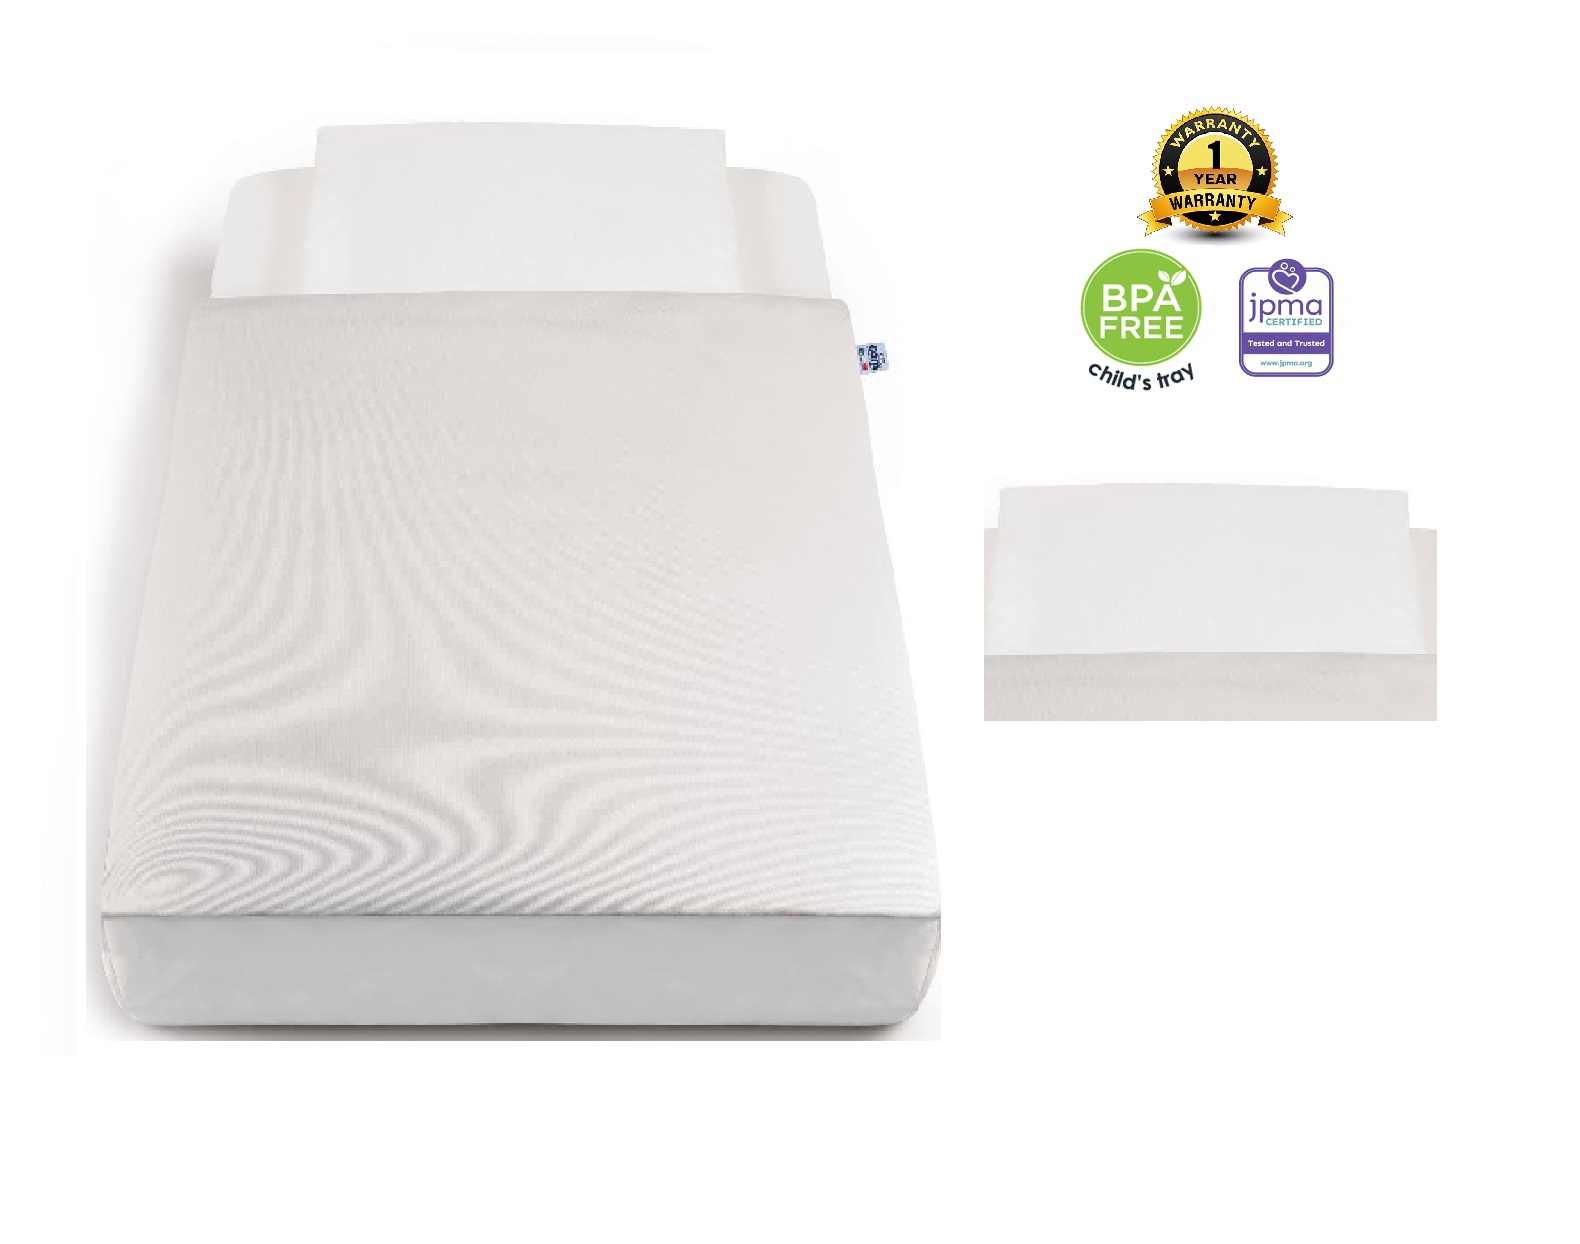 Cam - Baby Bedding set, Baby warm Duvet and Duvet cover, Baby bed, For Baby cot, Baby Bassinet, Soft Pillowcase and mattress cover, 1.1 kg, 4 pcs - Plain White